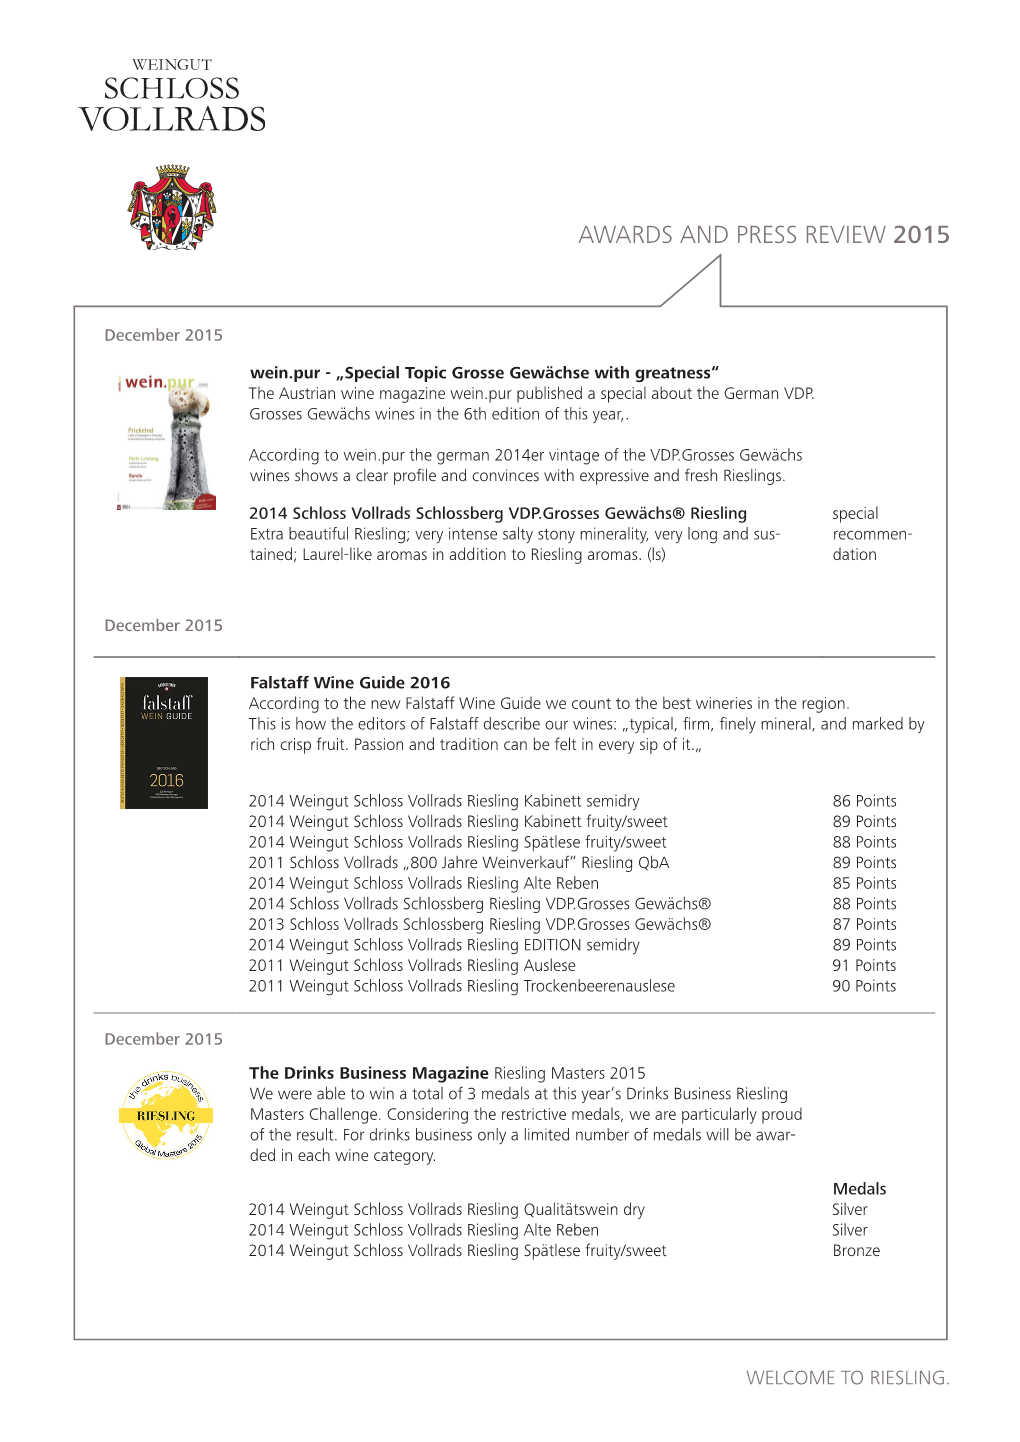 Awards and Press Review 2015